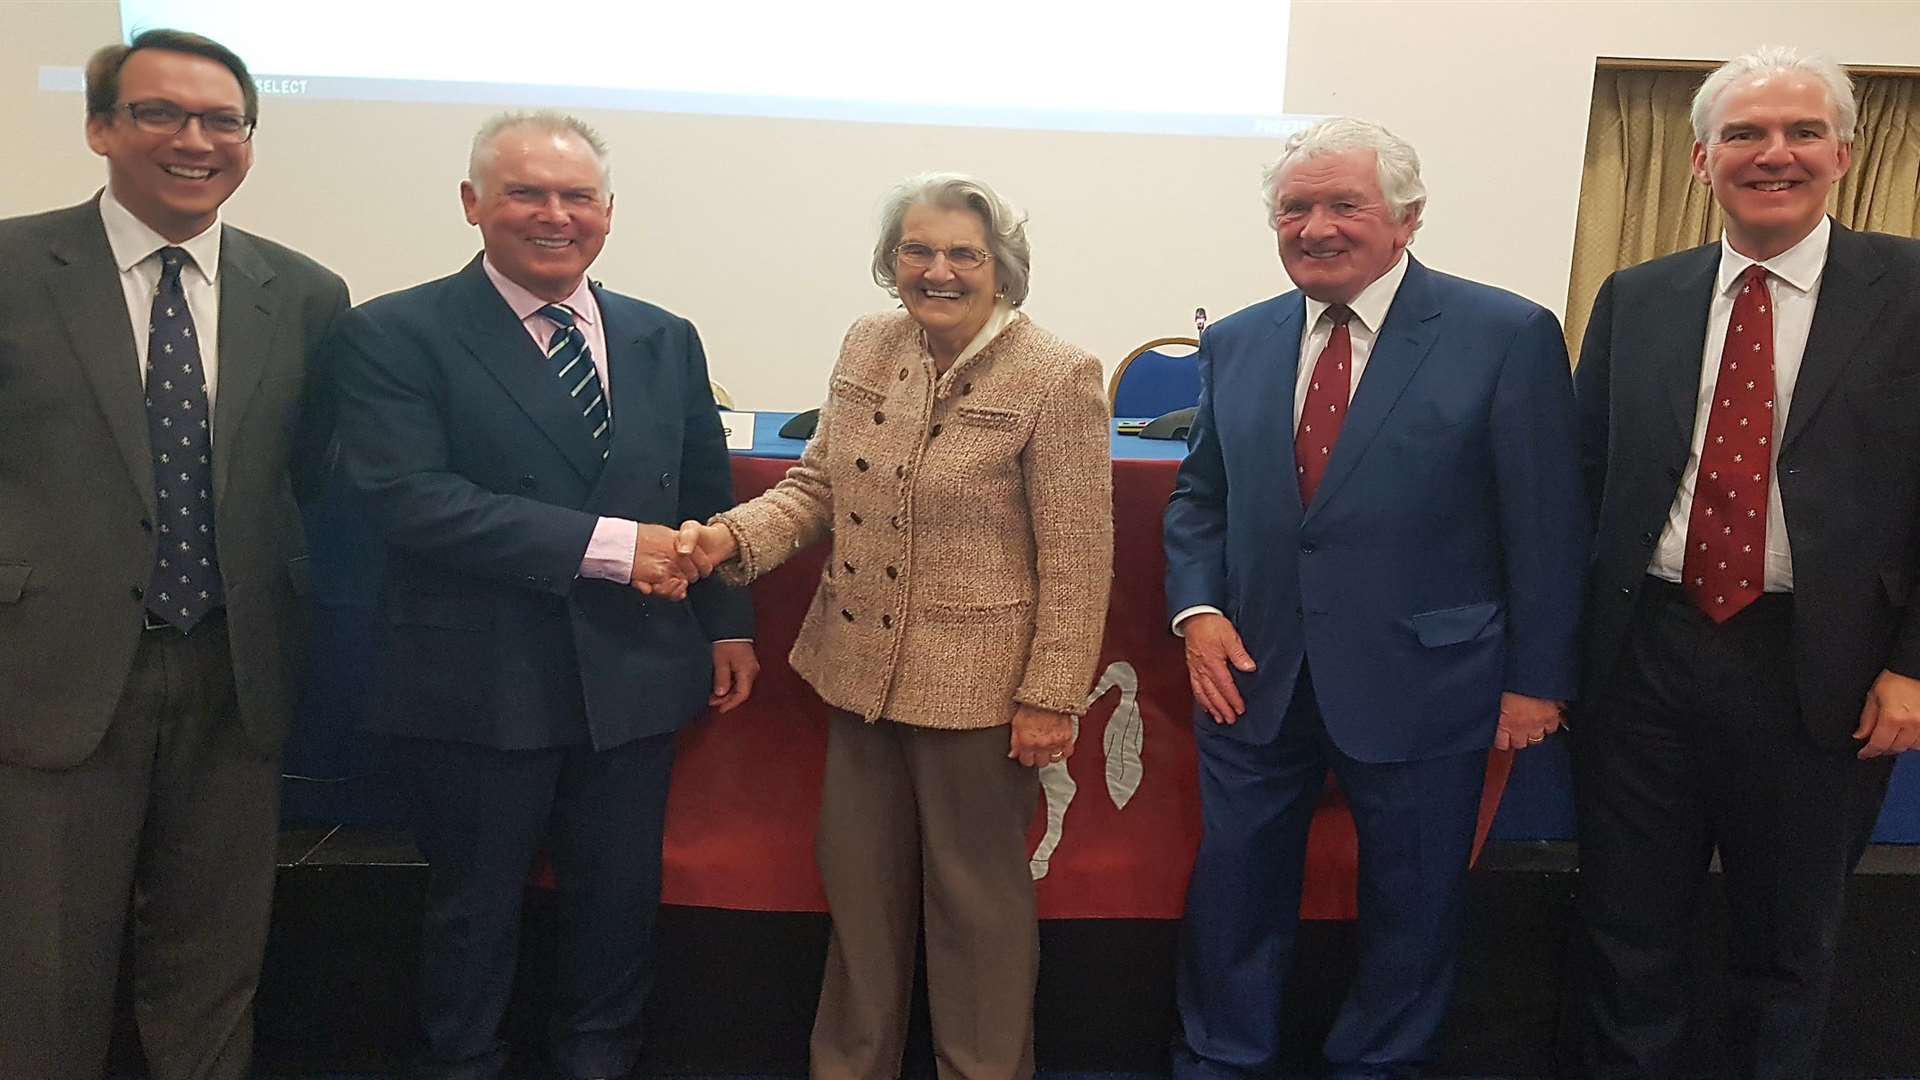 L-R Kent chief executive Jamie Clifford, new president Charlie Rowe, outgoing president Lady Kingsdown, outgoing chairman George Kennedy and new chairman Simon Philip at Kent's 2017 AGM